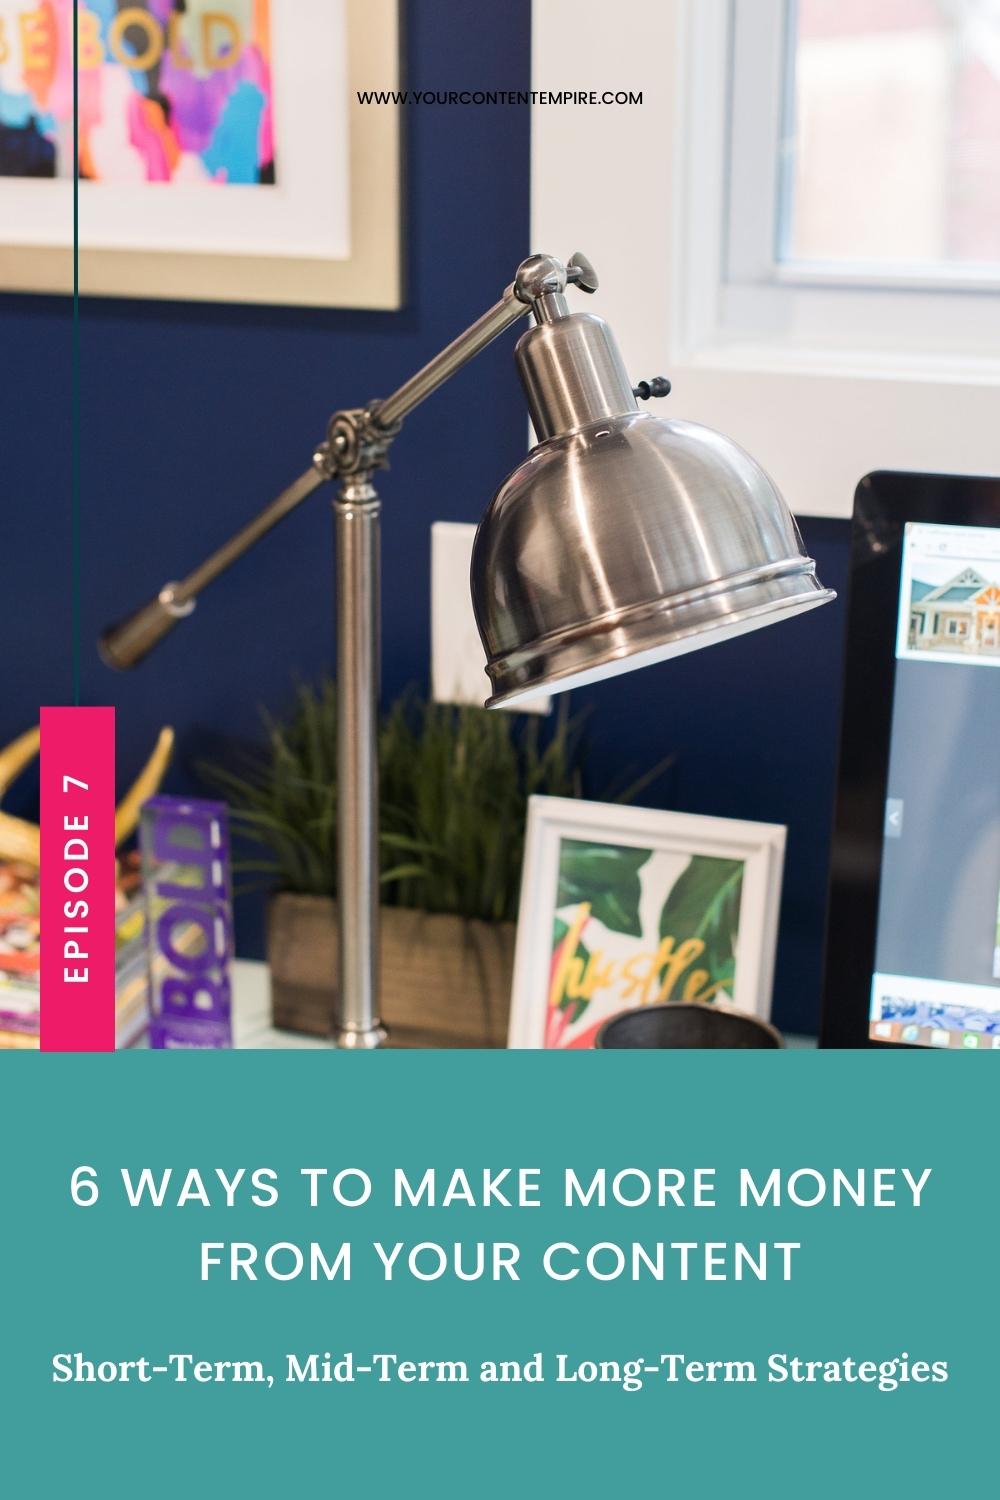 6 Ways to Make More Money from Your Content